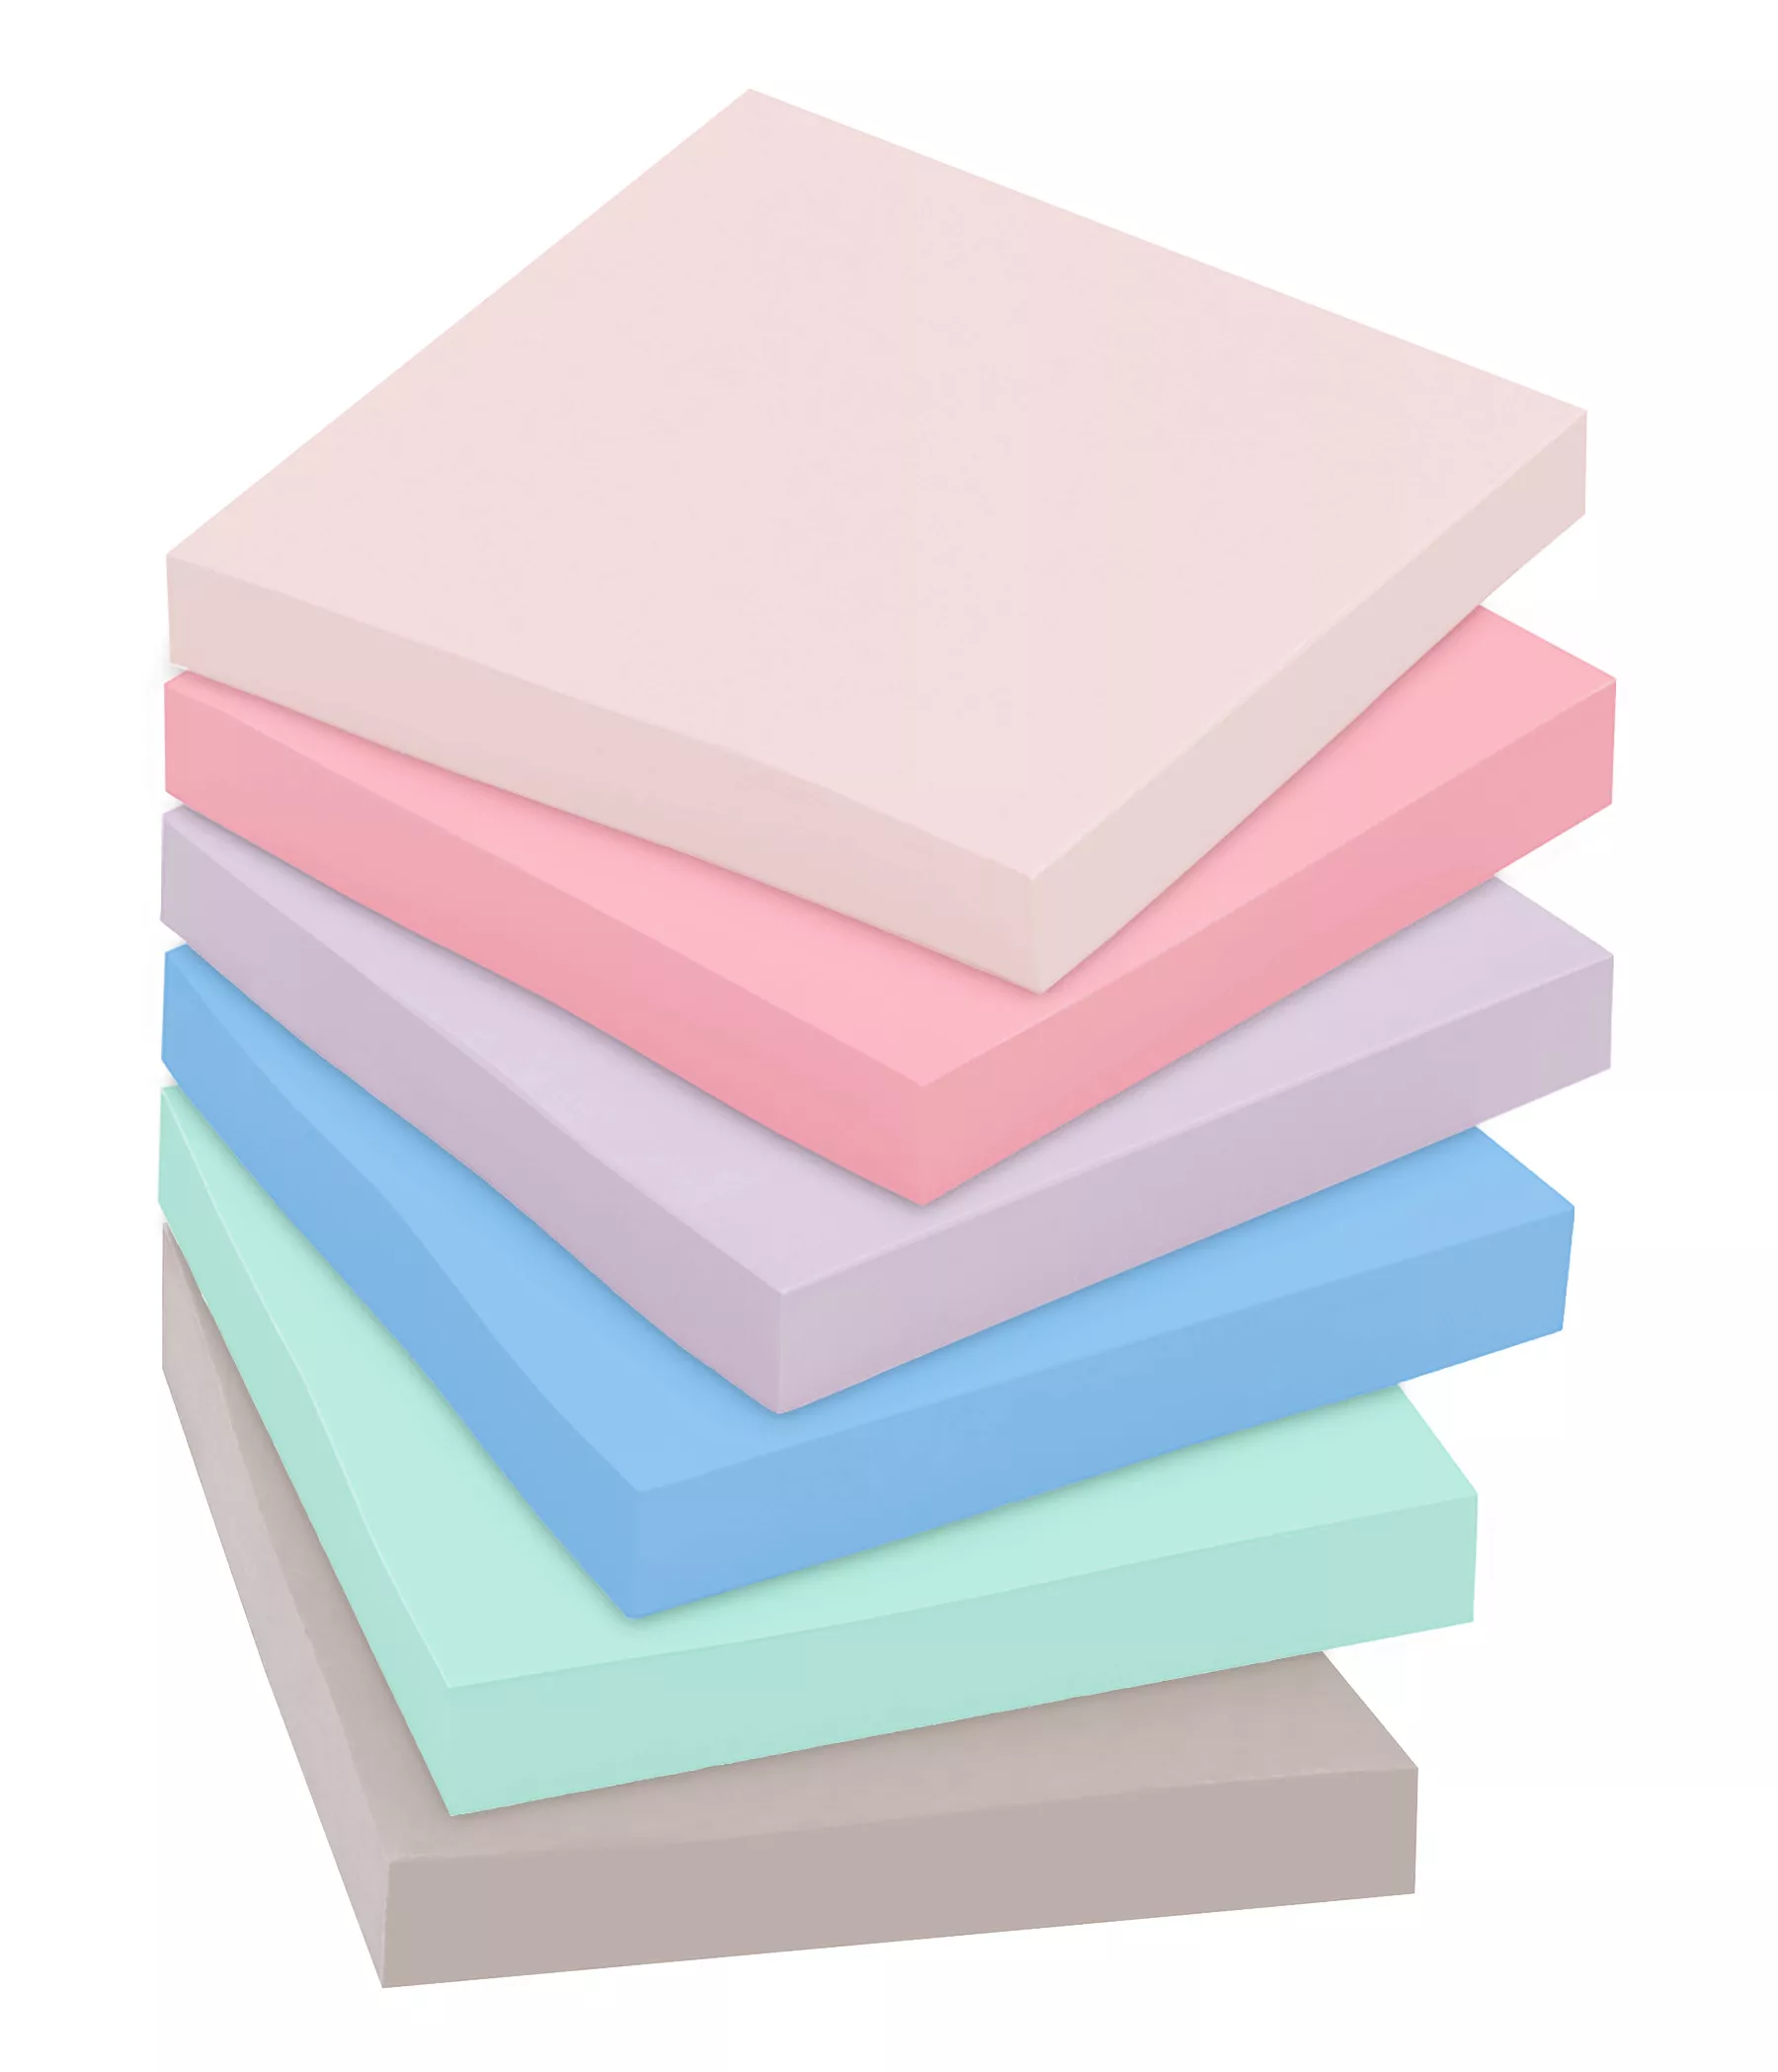 Product Number 654-6SSNRP | Post-it® Super Sticky Recycled Notes 654-6SSNRP